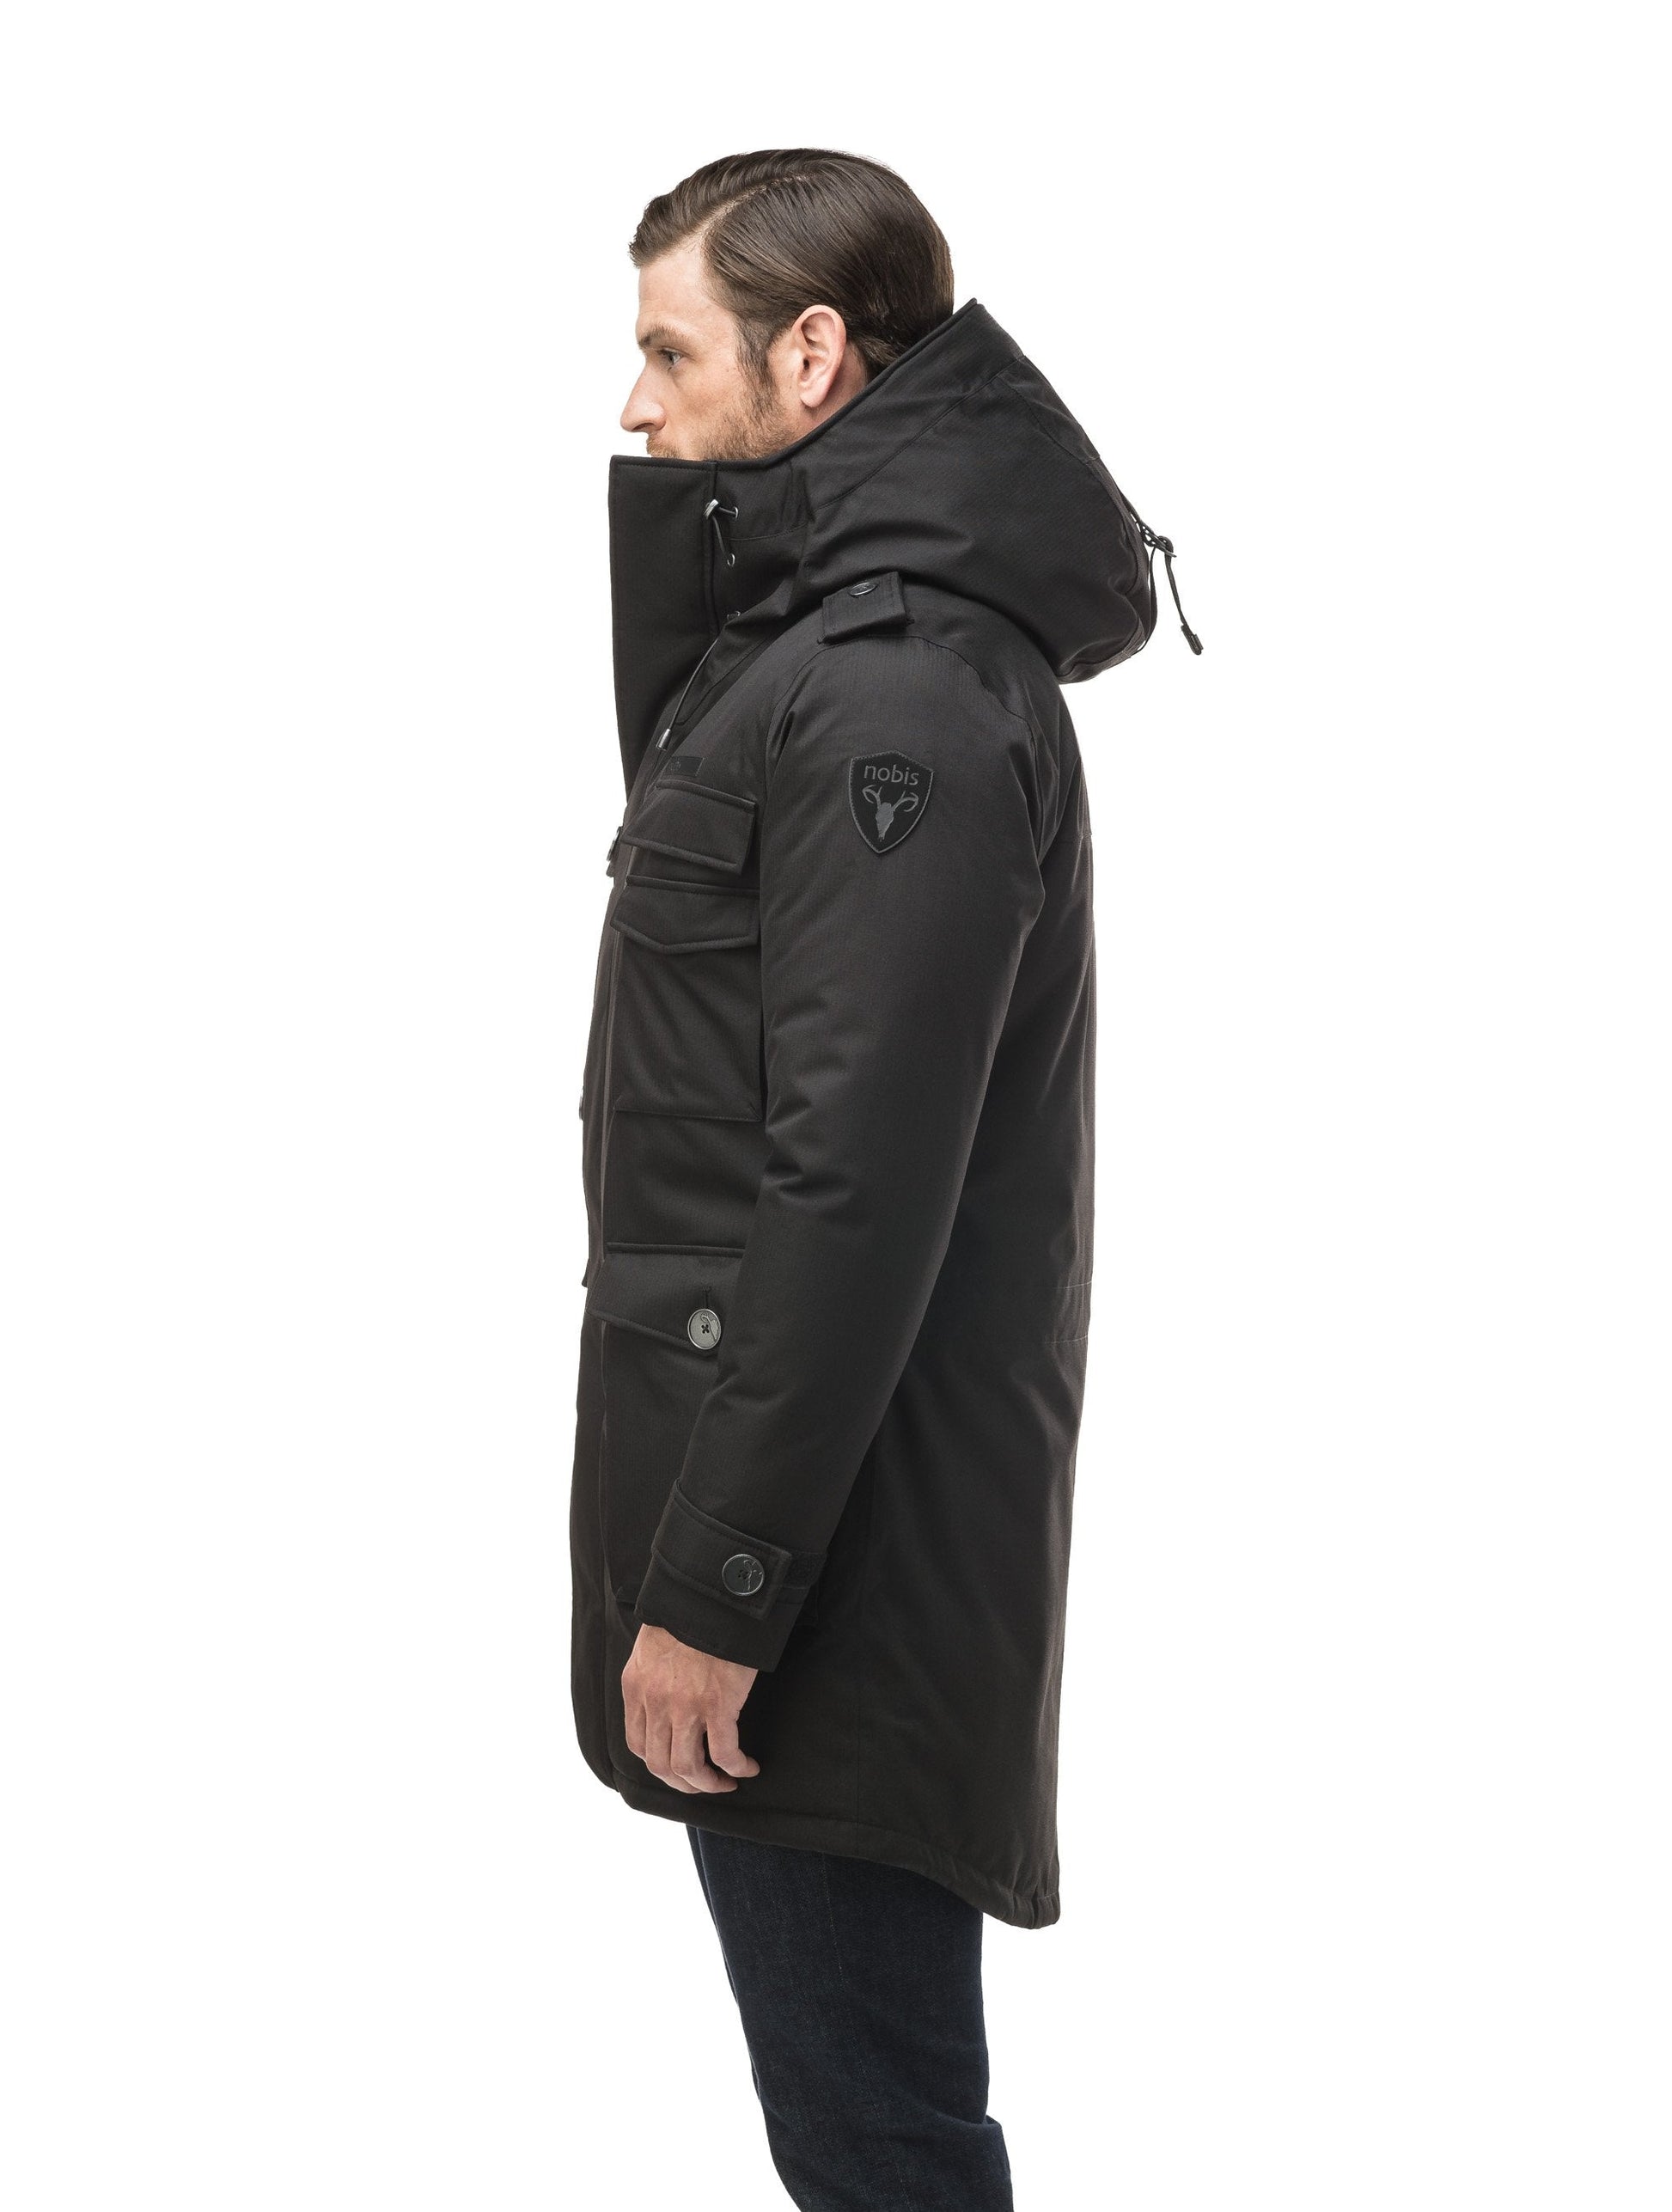 Men's down filled parka with faux button magnet closures and fur free hood with a fishtail hemline in Black